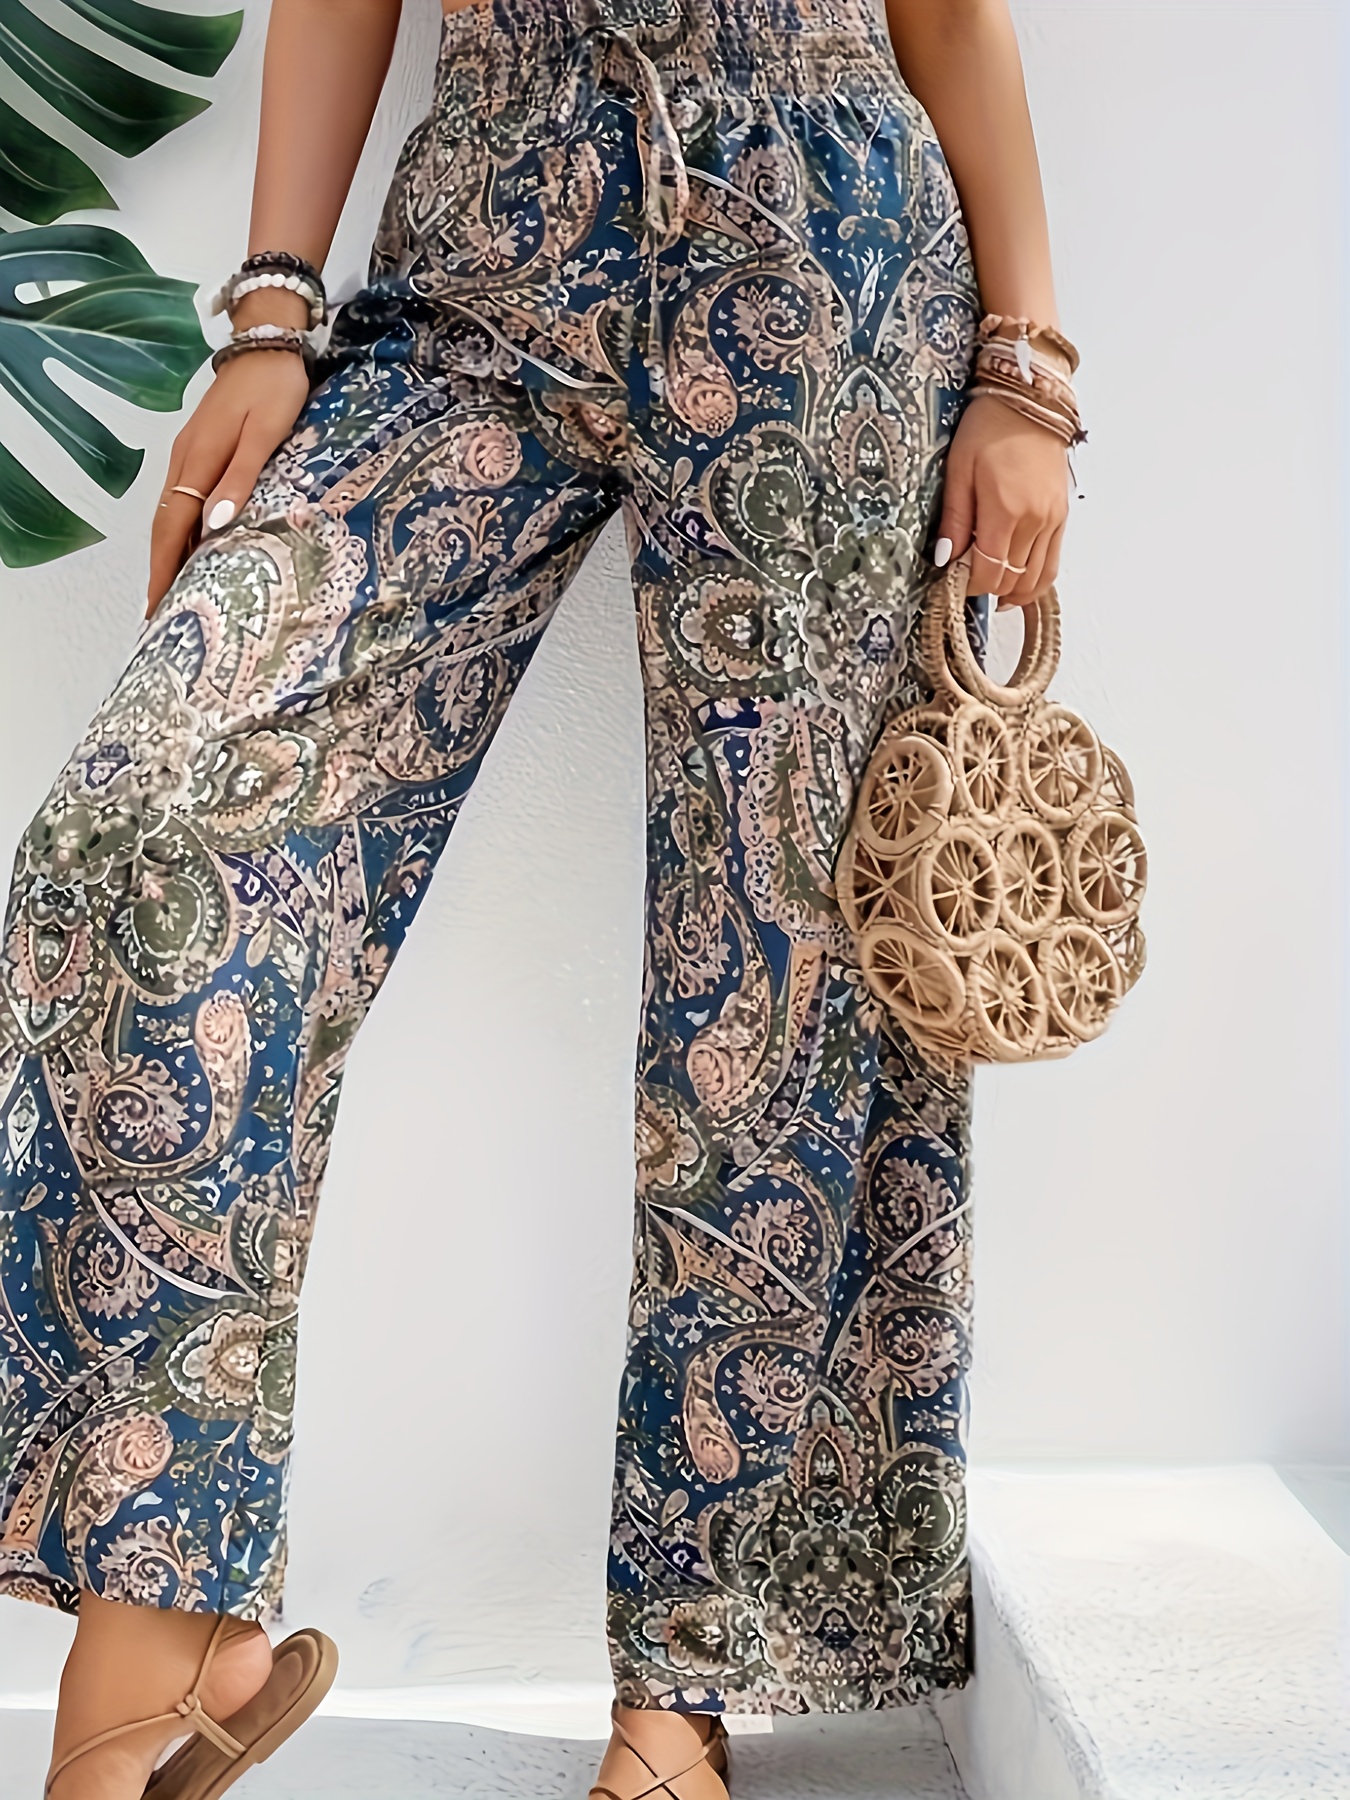 TIAFORD Women's Boho Printed Elastic High Waist Wide Leg Pants Casual  Paisley Printed Smocked Waist Loose Pants Trousers Gold at  Women's  Clothing store